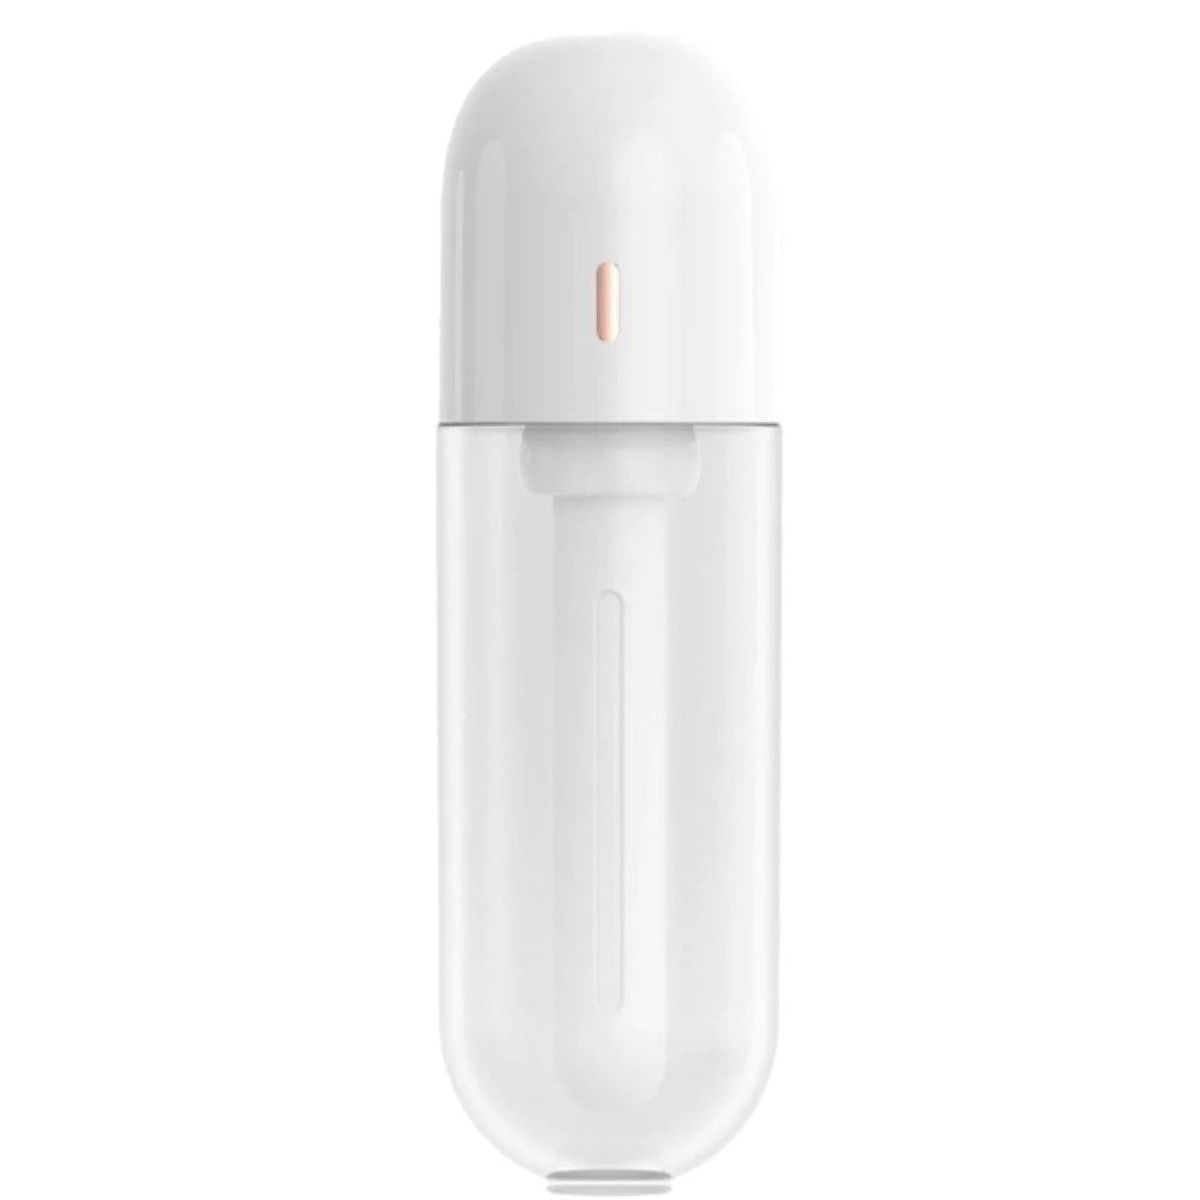 Photos - Humidifier Multitasky Anywhere Portable Bottle  by Multitasky™ - White MT-H